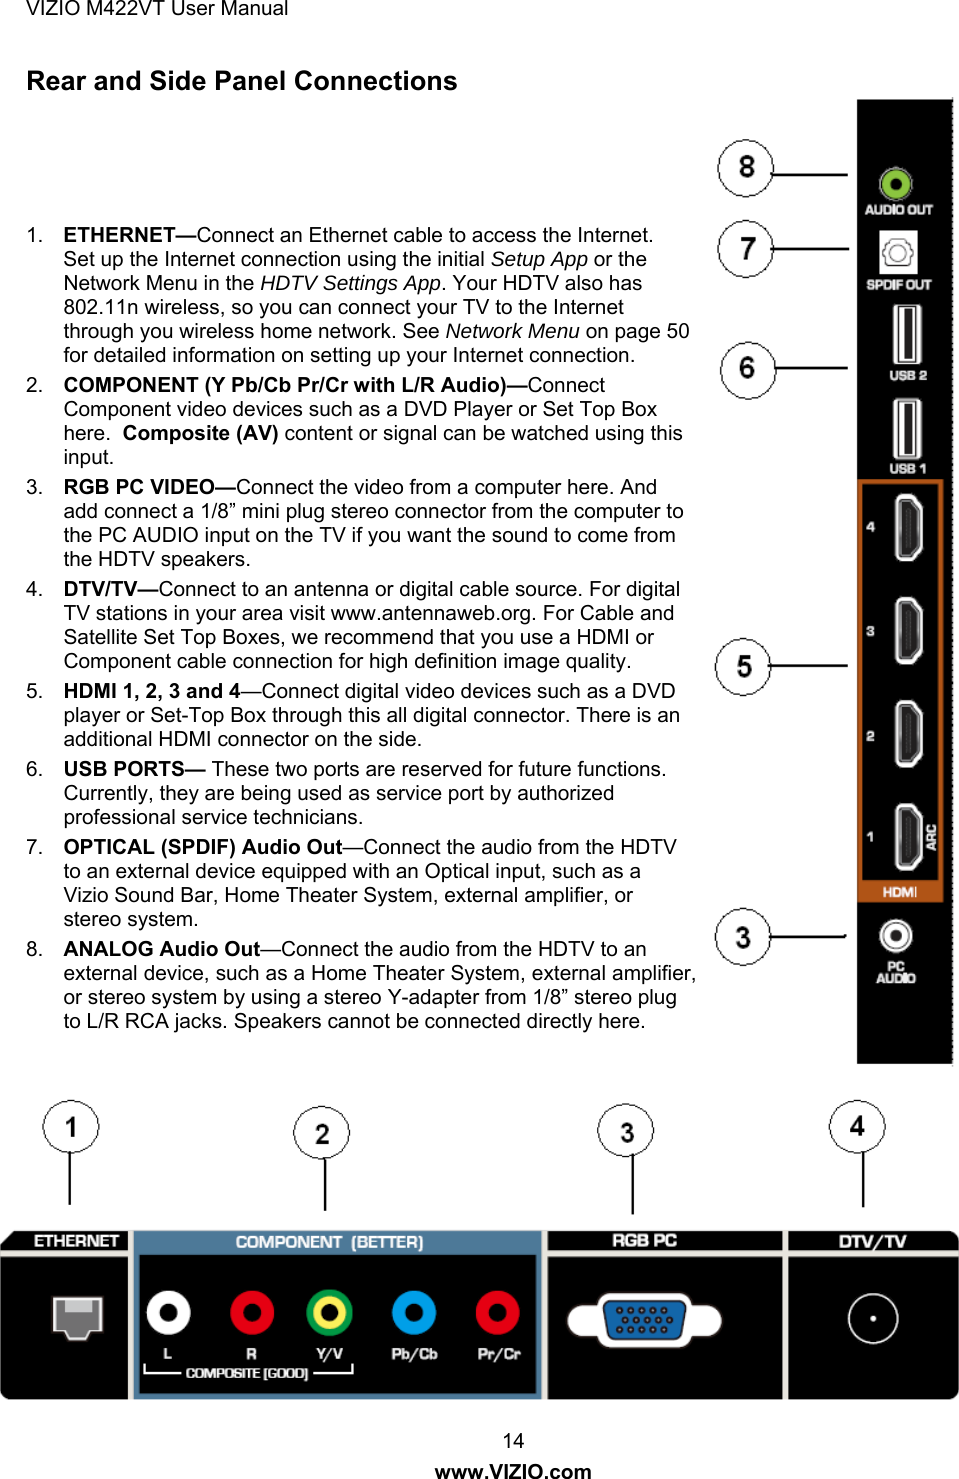 VIZIO M422VT User Manual 14 www.VIZIO.com Rear and Side Panel Connections      1.  ETHERNET—Connect an Ethernet cable to access the Internet. Set up the Internet connection using the initial Setup App or the Network Menu in the HDTV Settings App. Your HDTV also has 802.11n wireless, so you can connect your TV to the Internet through you wireless home network. See Network Menu on page 50 for detailed information on setting up your Internet connection.  2.  COMPONENT (Y Pb/Cb Pr/Cr with L/R Audio)—Connect Component video devices such as a DVD Player or Set Top Box here.  Composite (AV) content or signal can be watched using this input. 3.  RGB PC VIDEO—Connect the video from a computer here. And add connect a 1/8” mini plug stereo connector from the computer to the PC AUDIO input on the TV if you want the sound to come from the HDTV speakers.  4.  DTV/TV—Connect to an antenna or digital cable source. For digital TV stations in your area visit www.antennaweb.org. For Cable and Satellite Set Top Boxes, we recommend that you use a HDMI or Component cable connection for high definition image quality. 5.  HDMI 1, 2, 3 and 4—Connect digital video devices such as a DVD player or Set-Top Box through this all digital connector. There is an additional HDMI connector on the side. 6.  USB PORTS— These two ports are reserved for future functions. Currently, they are being used as service port by authorized professional service technicians. 7.  OPTICAL (SPDIF) Audio Out—Connect the audio from the HDTV to an external device equipped with an Optical input, such as a Vizio Sound Bar, Home Theater System, external amplifier, or stereo system.  8.  ANALOG Audio Out—Connect the audio from the HDTV to an external device, such as a Home Theater System, external amplifier, or stereo system by using a stereo Y-adapter from 1/8” stereo plug to L/R RCA jacks. Speakers cannot be connected directly here.   